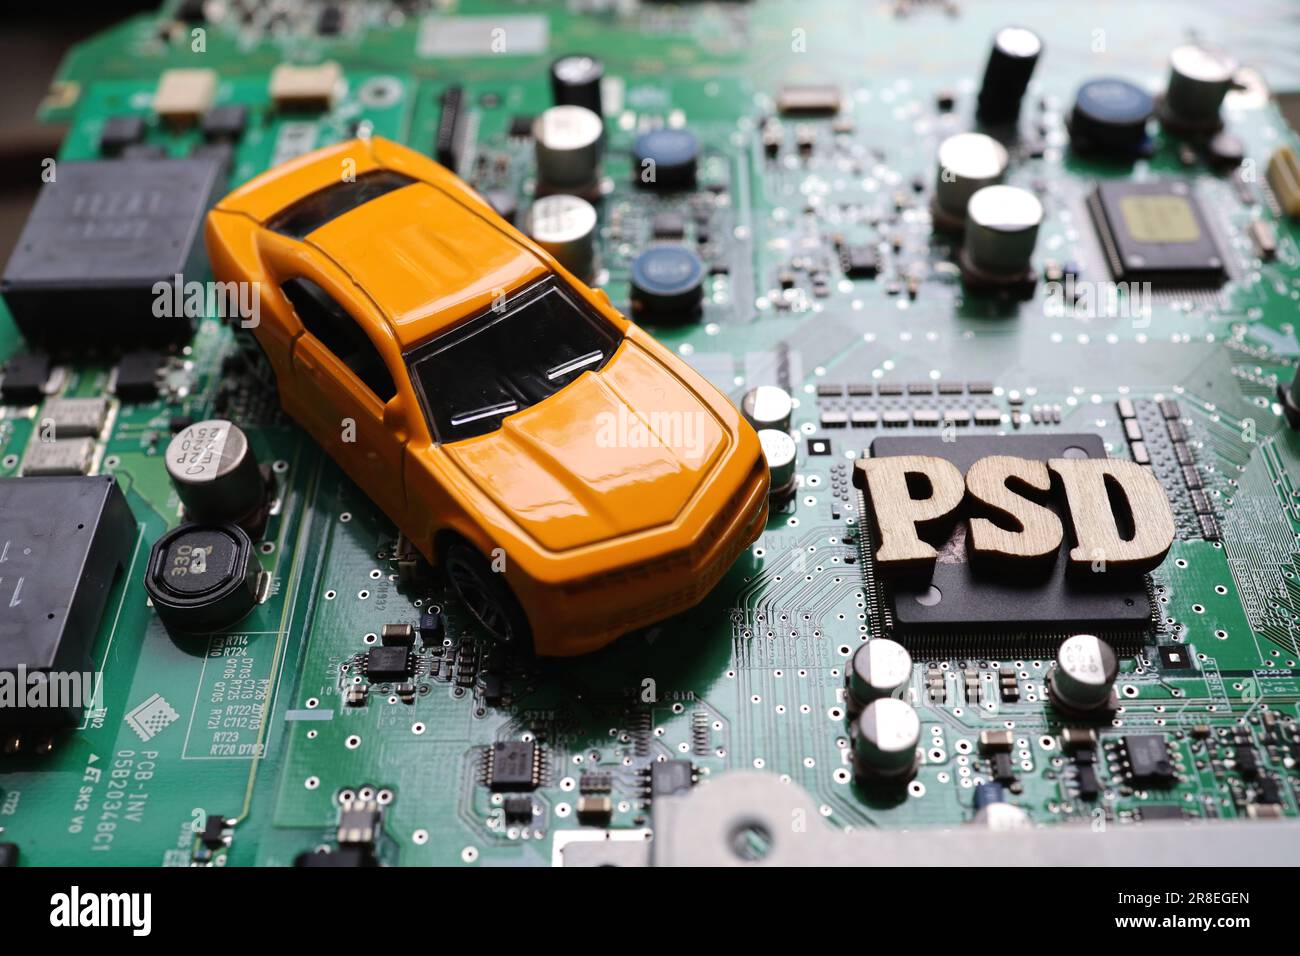 A photo on the theme of the automotive industry and power semiconductors (PSD). Stock Photo